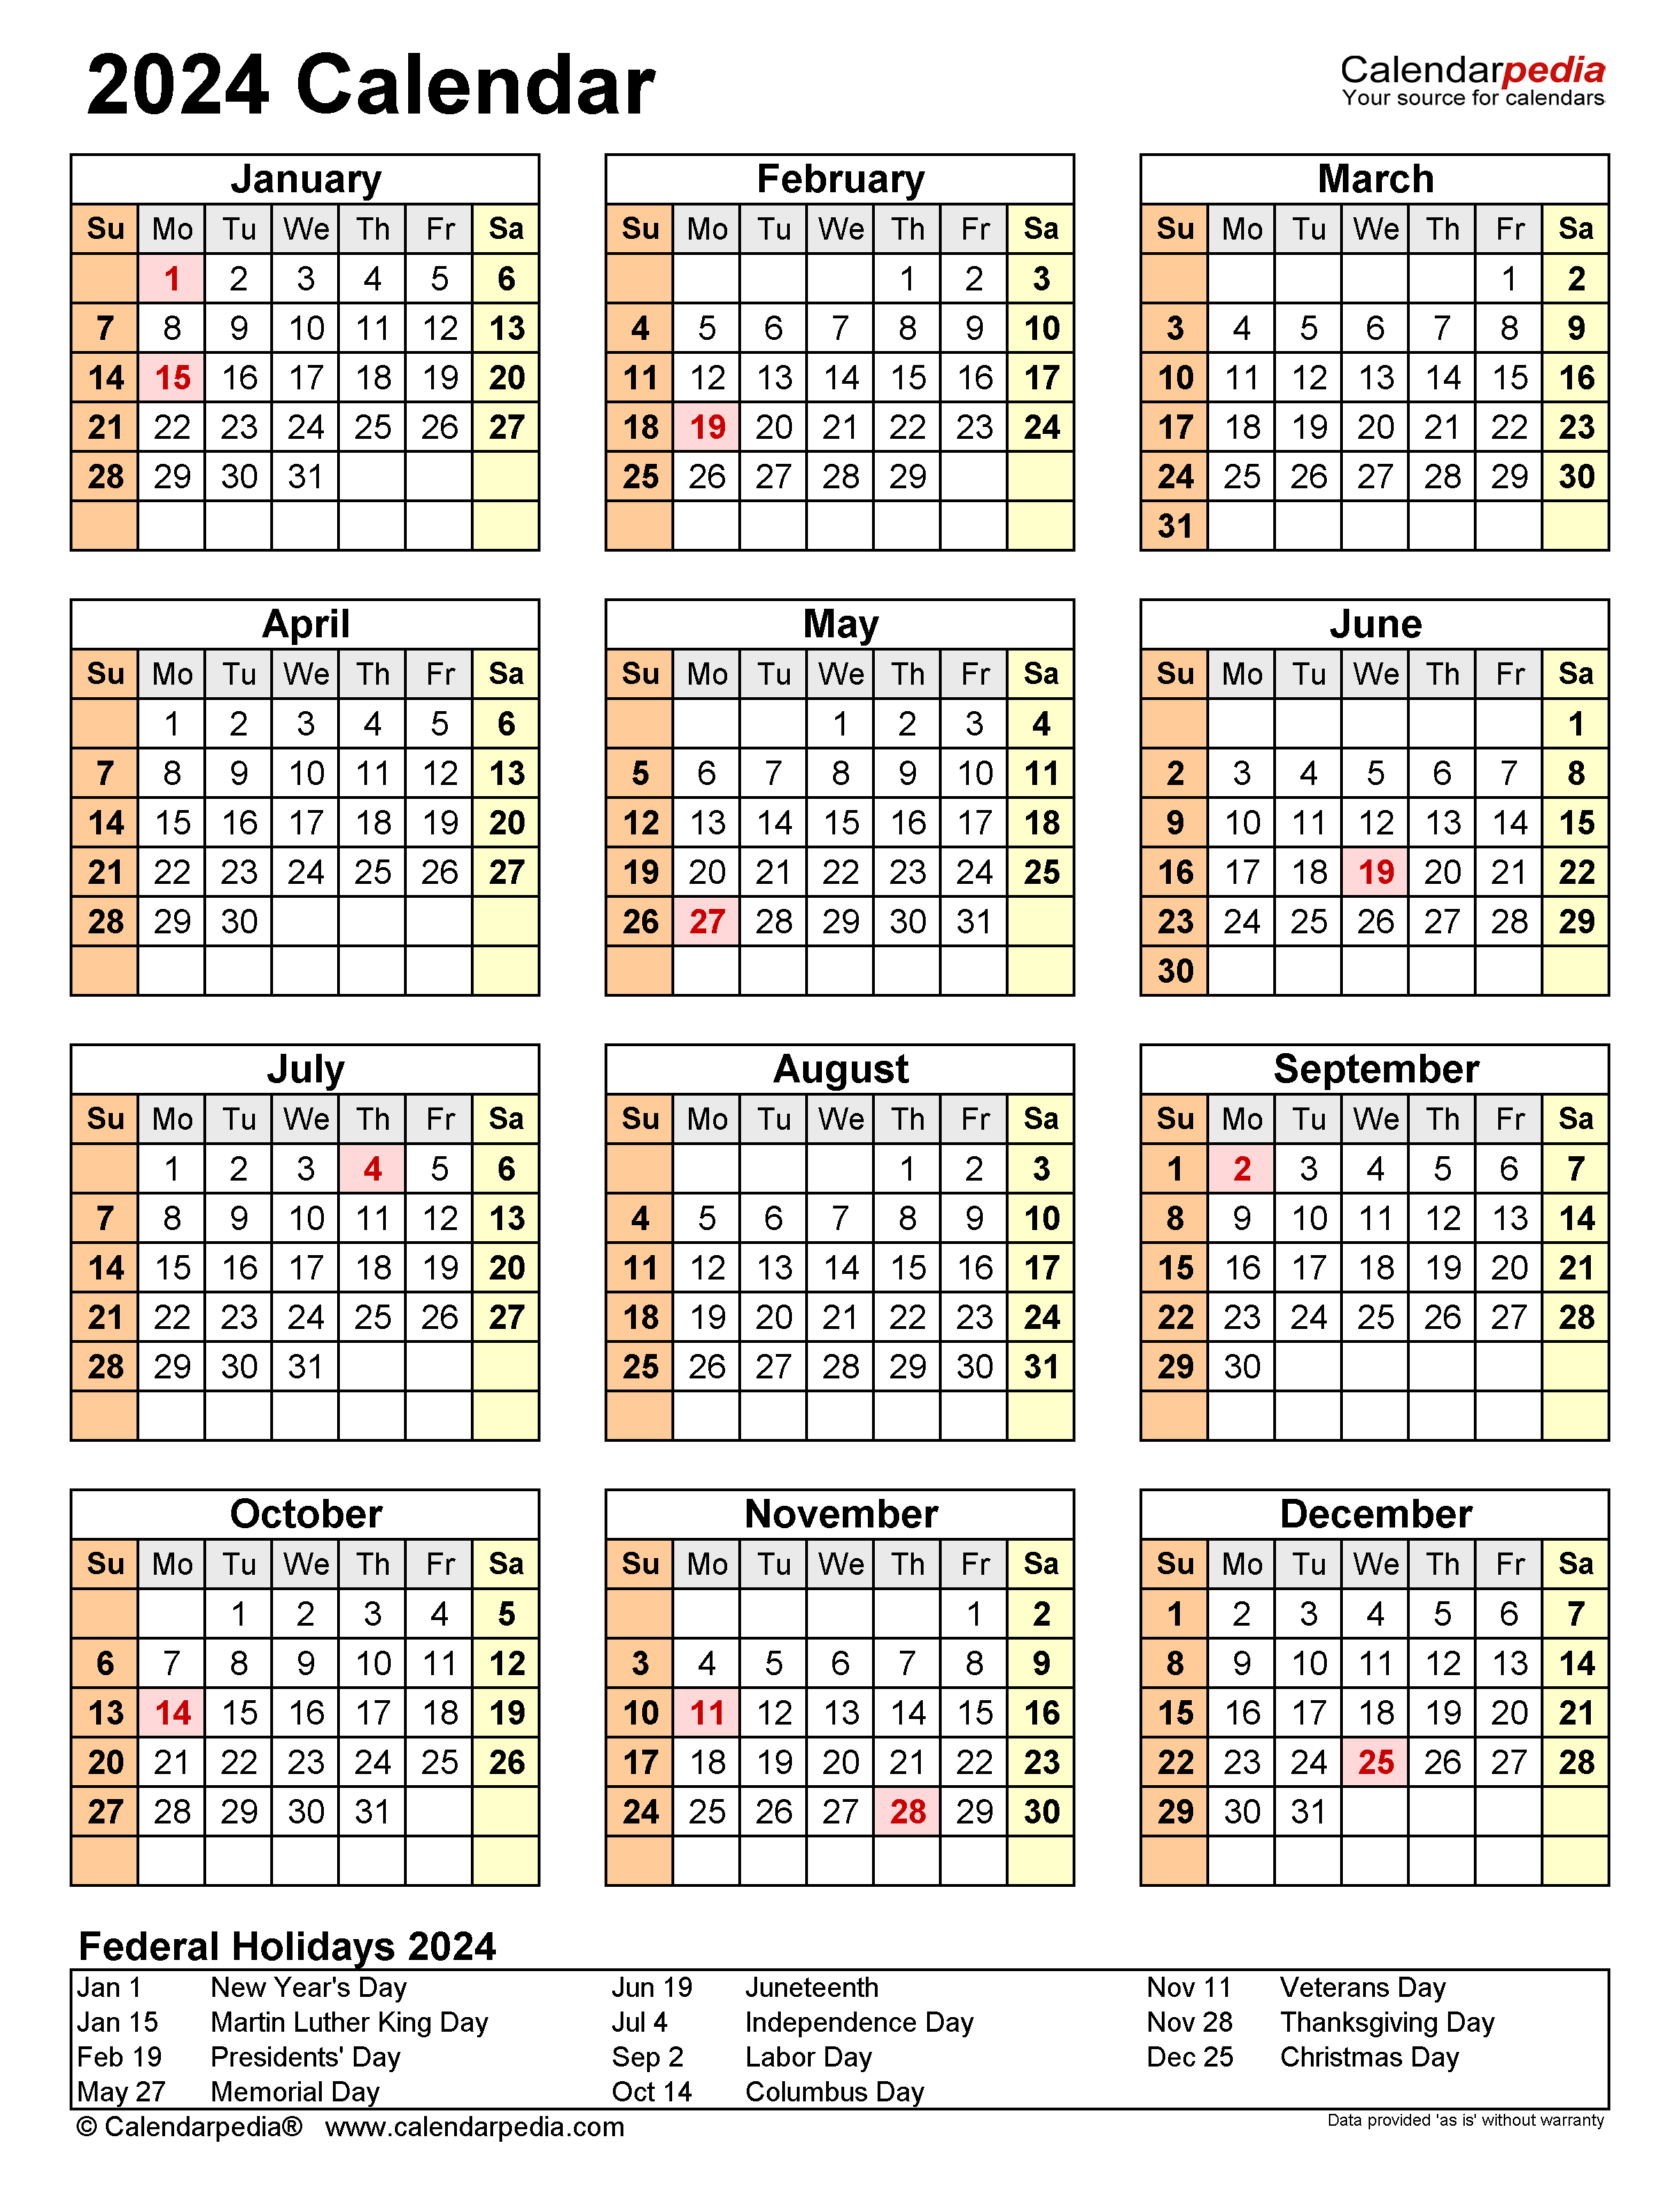 Free Printable 2024 Calendar With Holidays Crownflourmills - Free Printable 2024 Calendar With Holidays Without Download